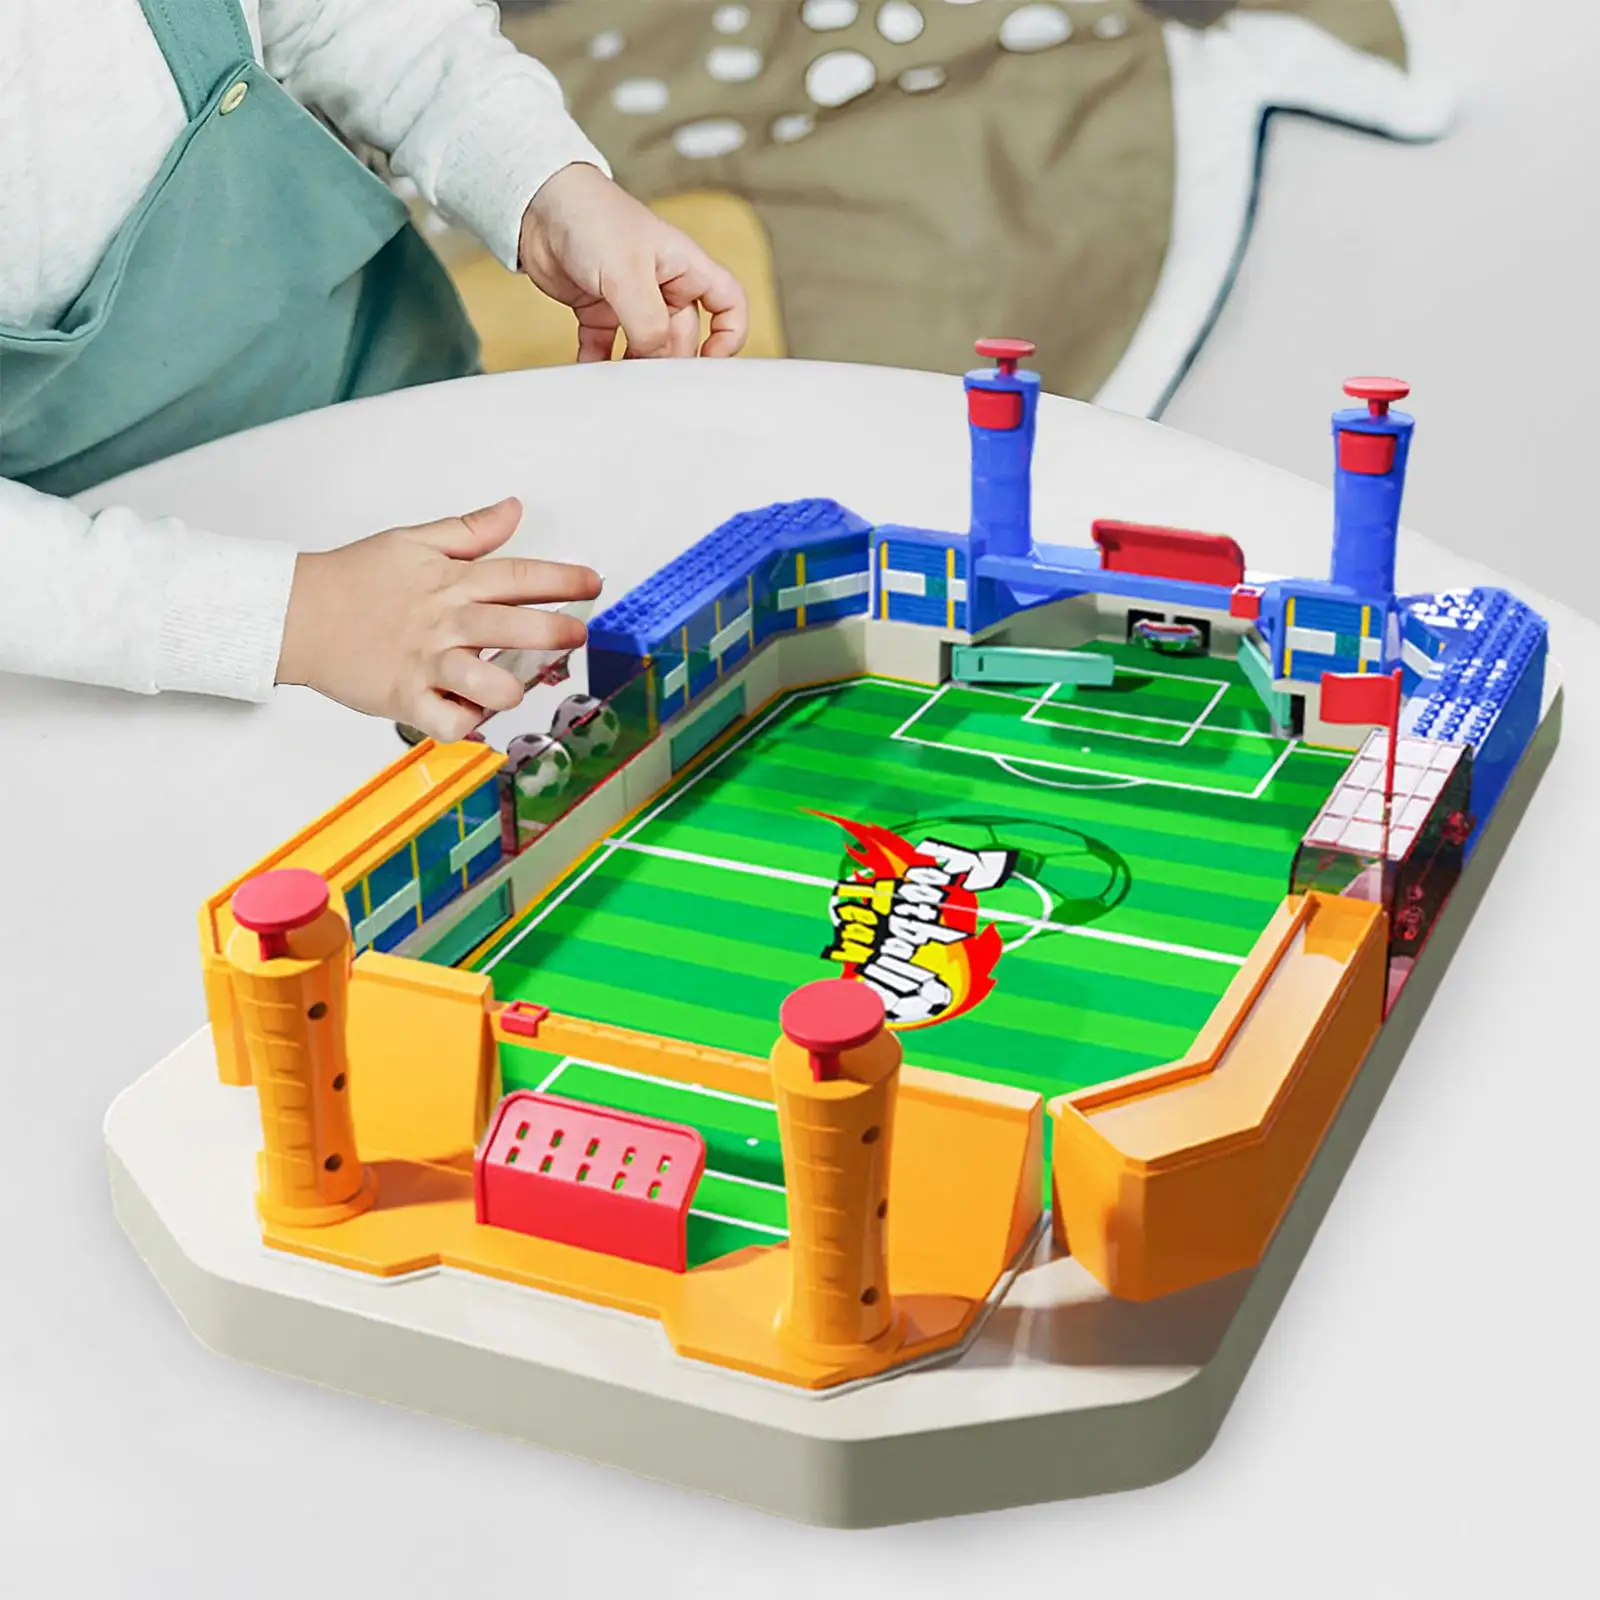 

Compact Interactive Foosball Game - Portable Tabletop Soccer Fun for All Ages